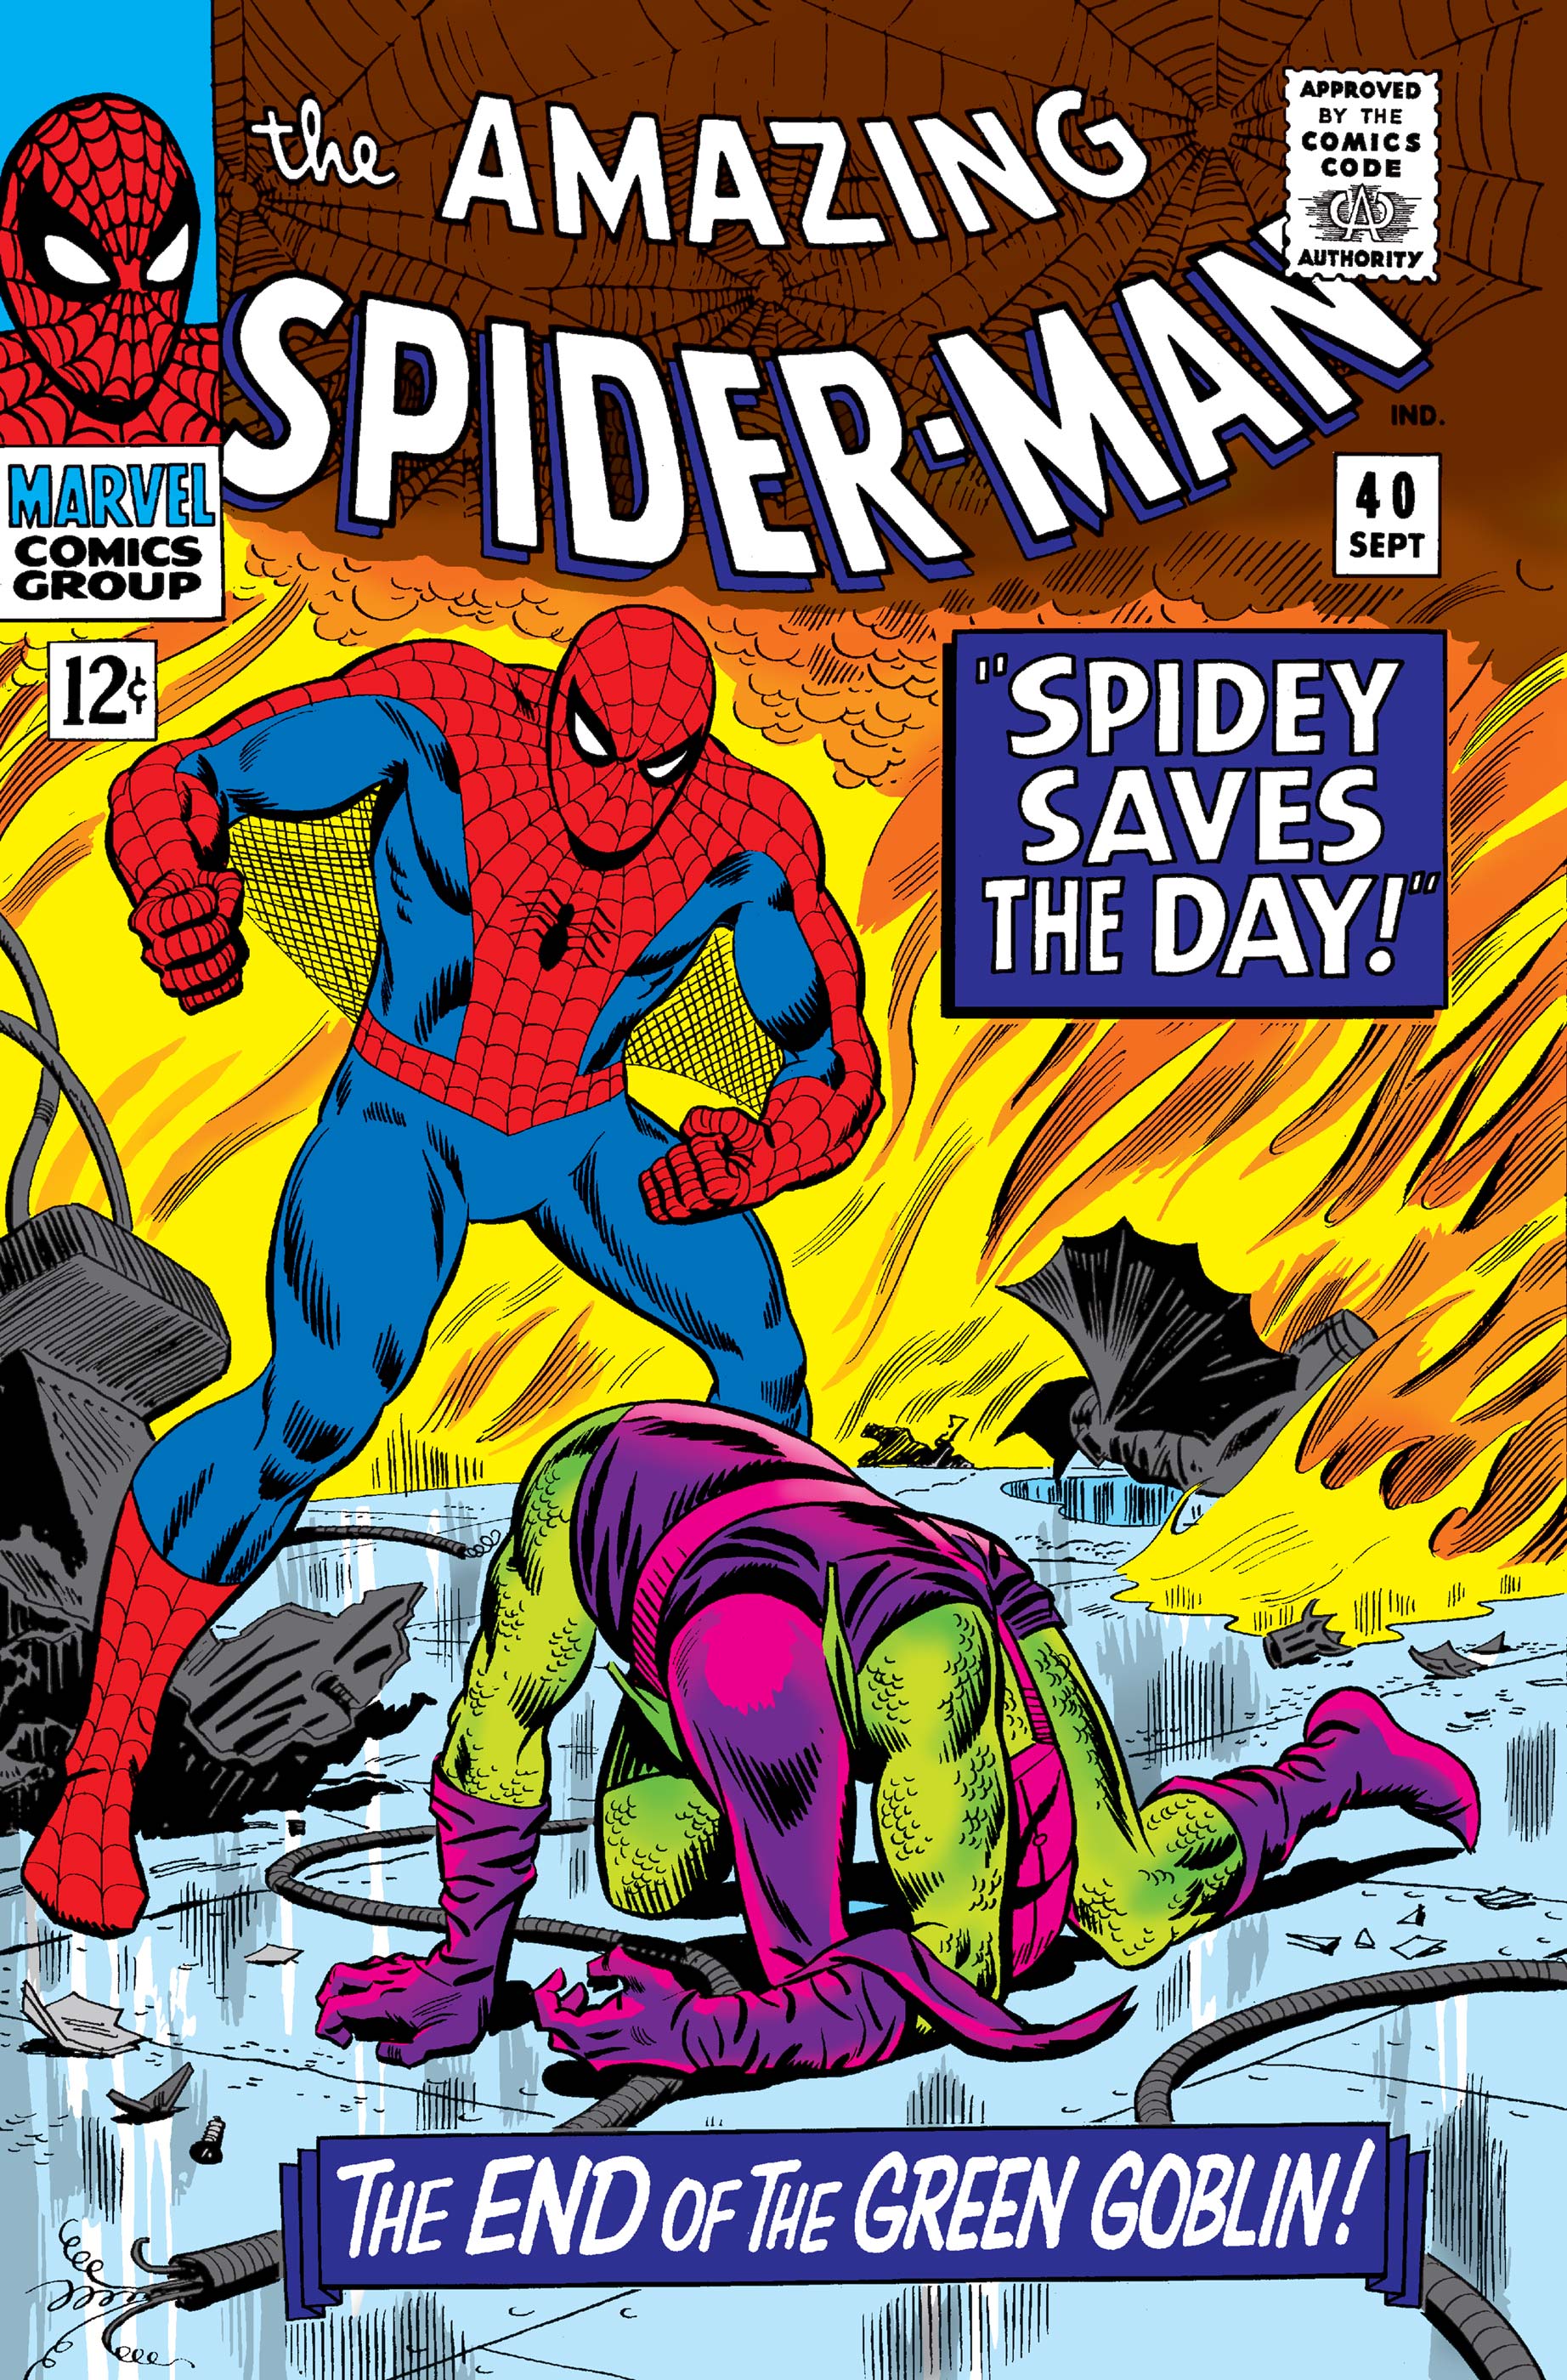 Amazing Spider-Man Annual (series 1) No. 39, Marvel Comics Back Issues